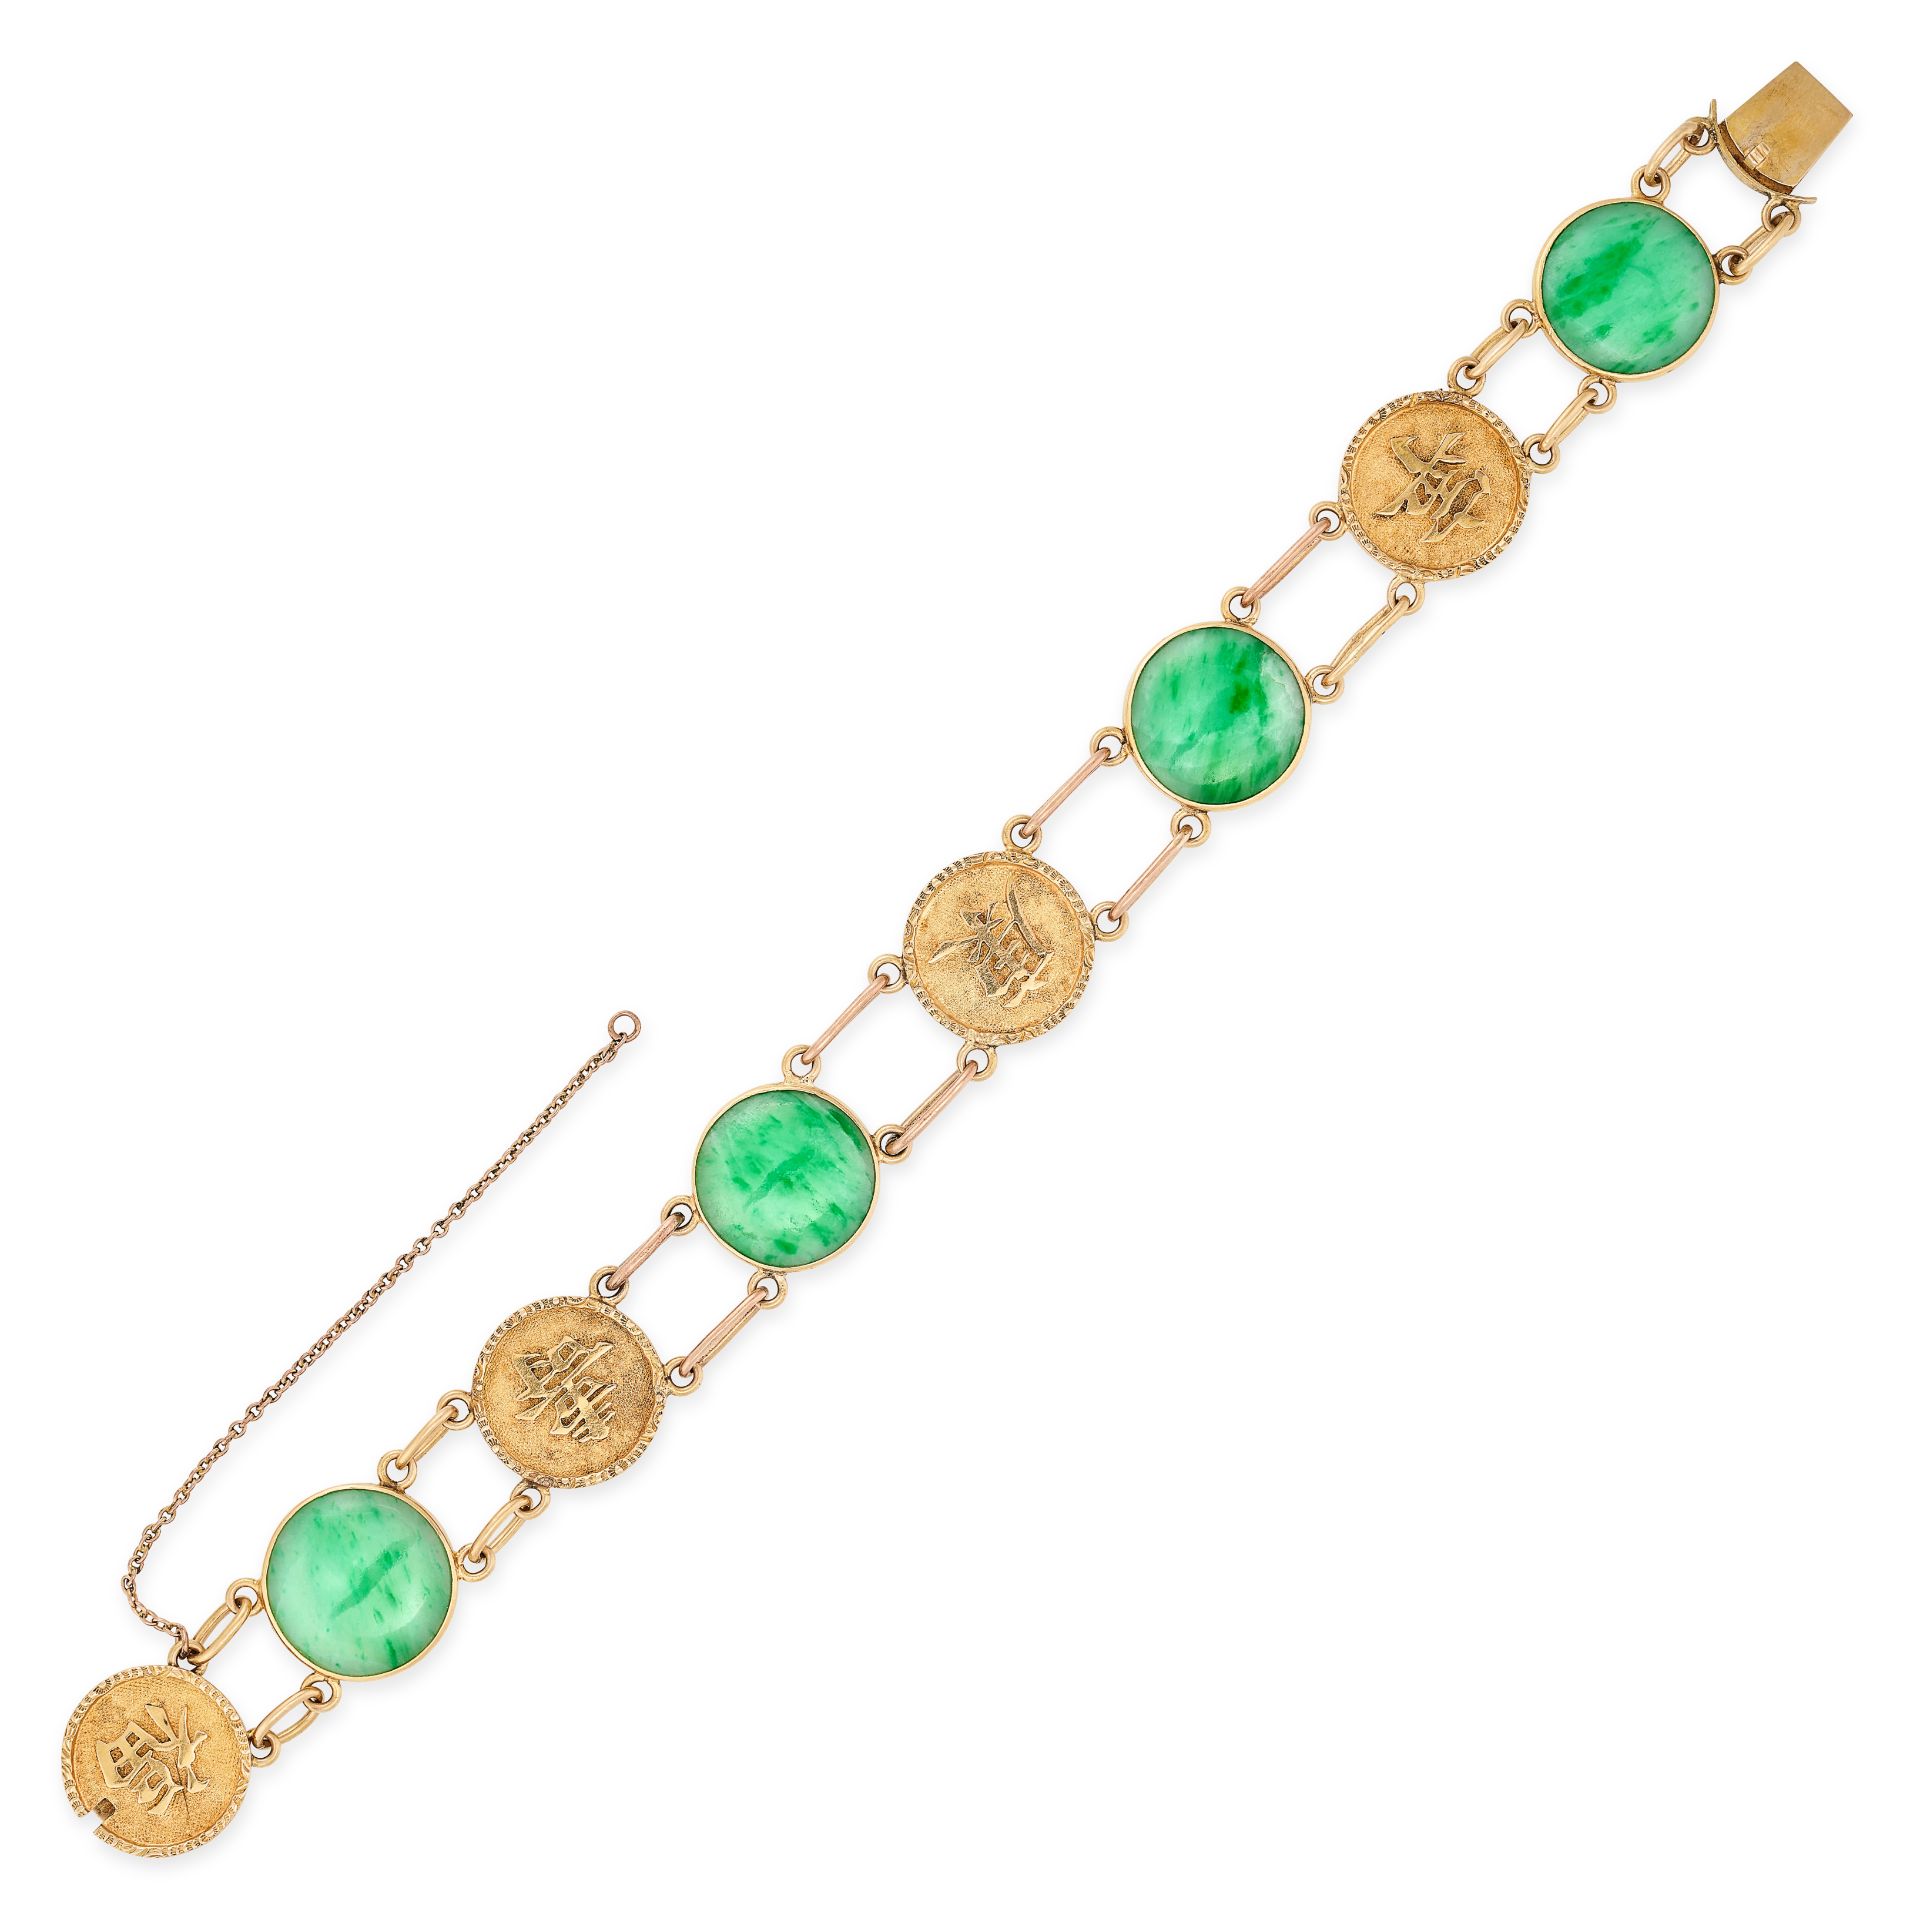 A CHINESE JADEITE JADE BRACELET in 20ct yellow gold, set with four round cabochon jadeite accented